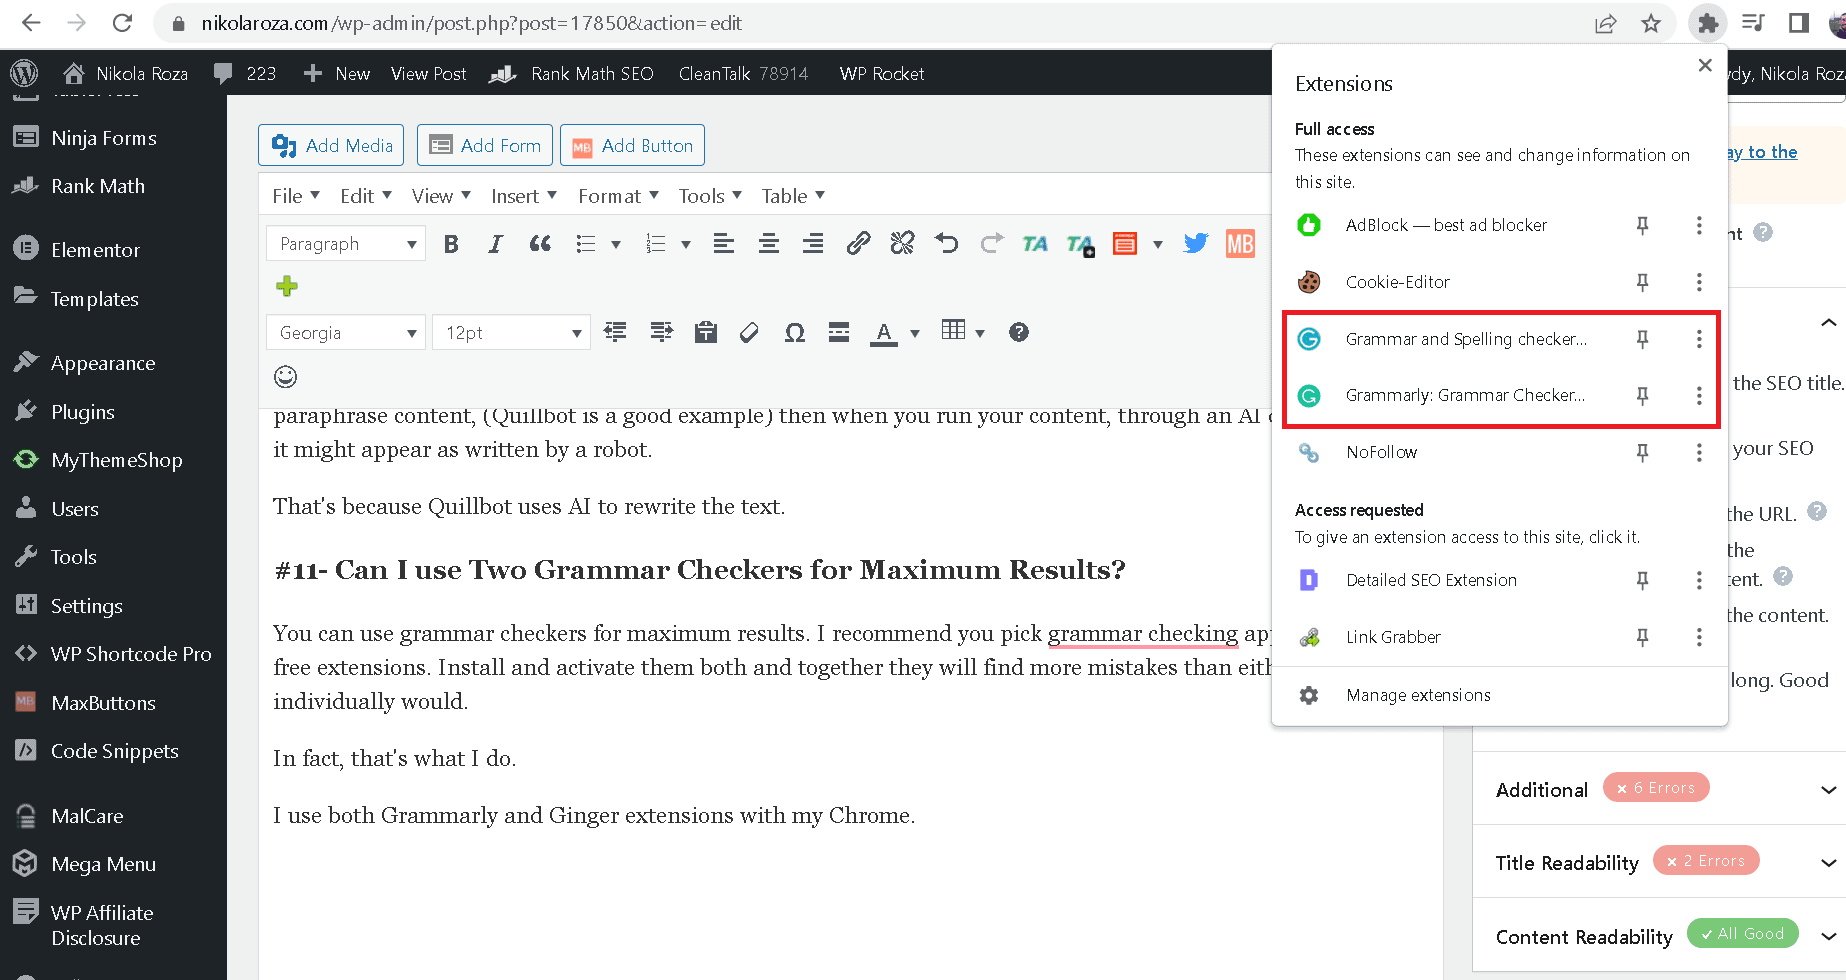 You can use two grammar-checking extensions with your Chrome browser